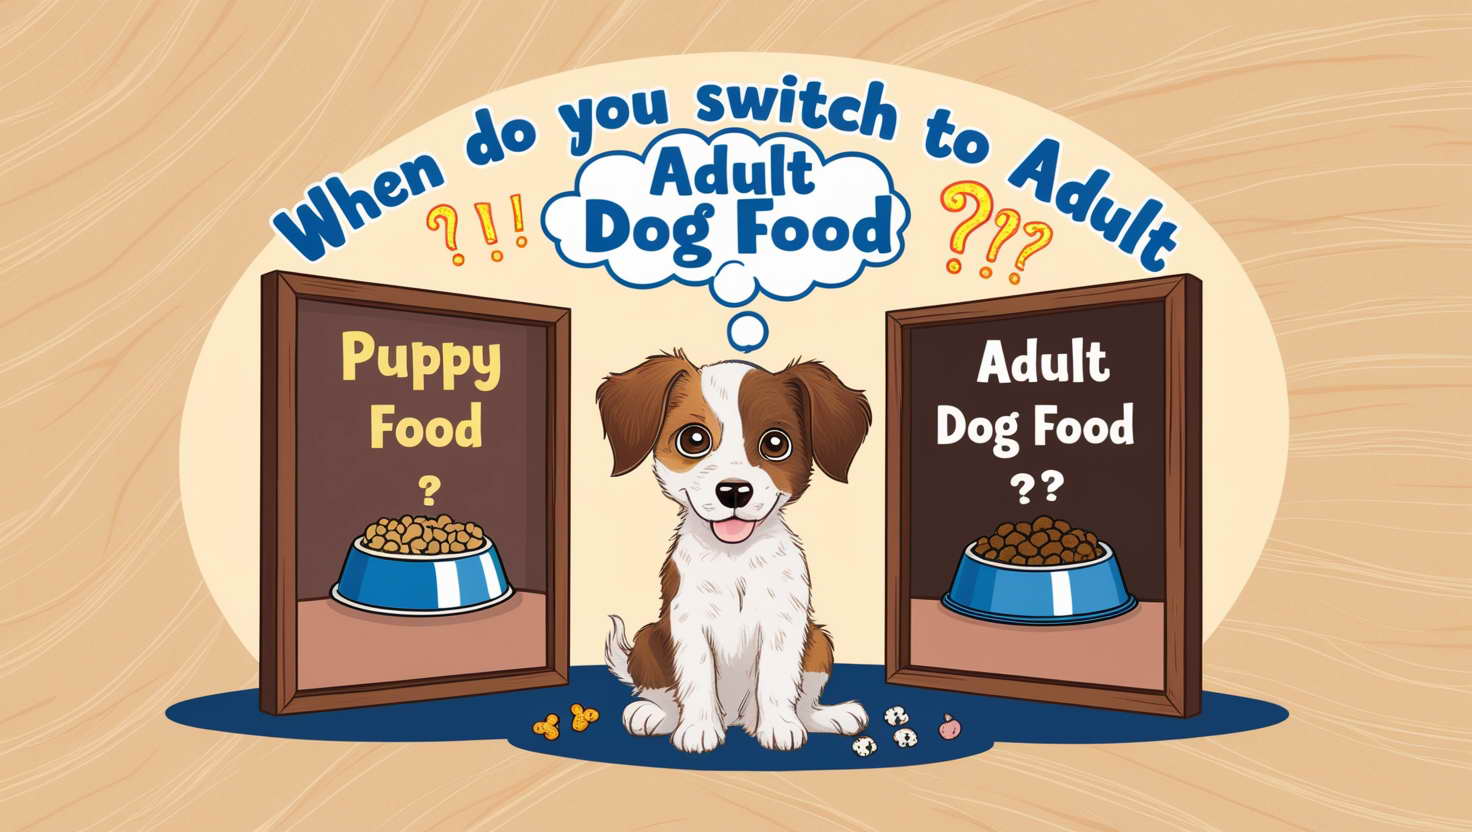 When Do You Switch To Adult Dog Food? A Musician’s Take